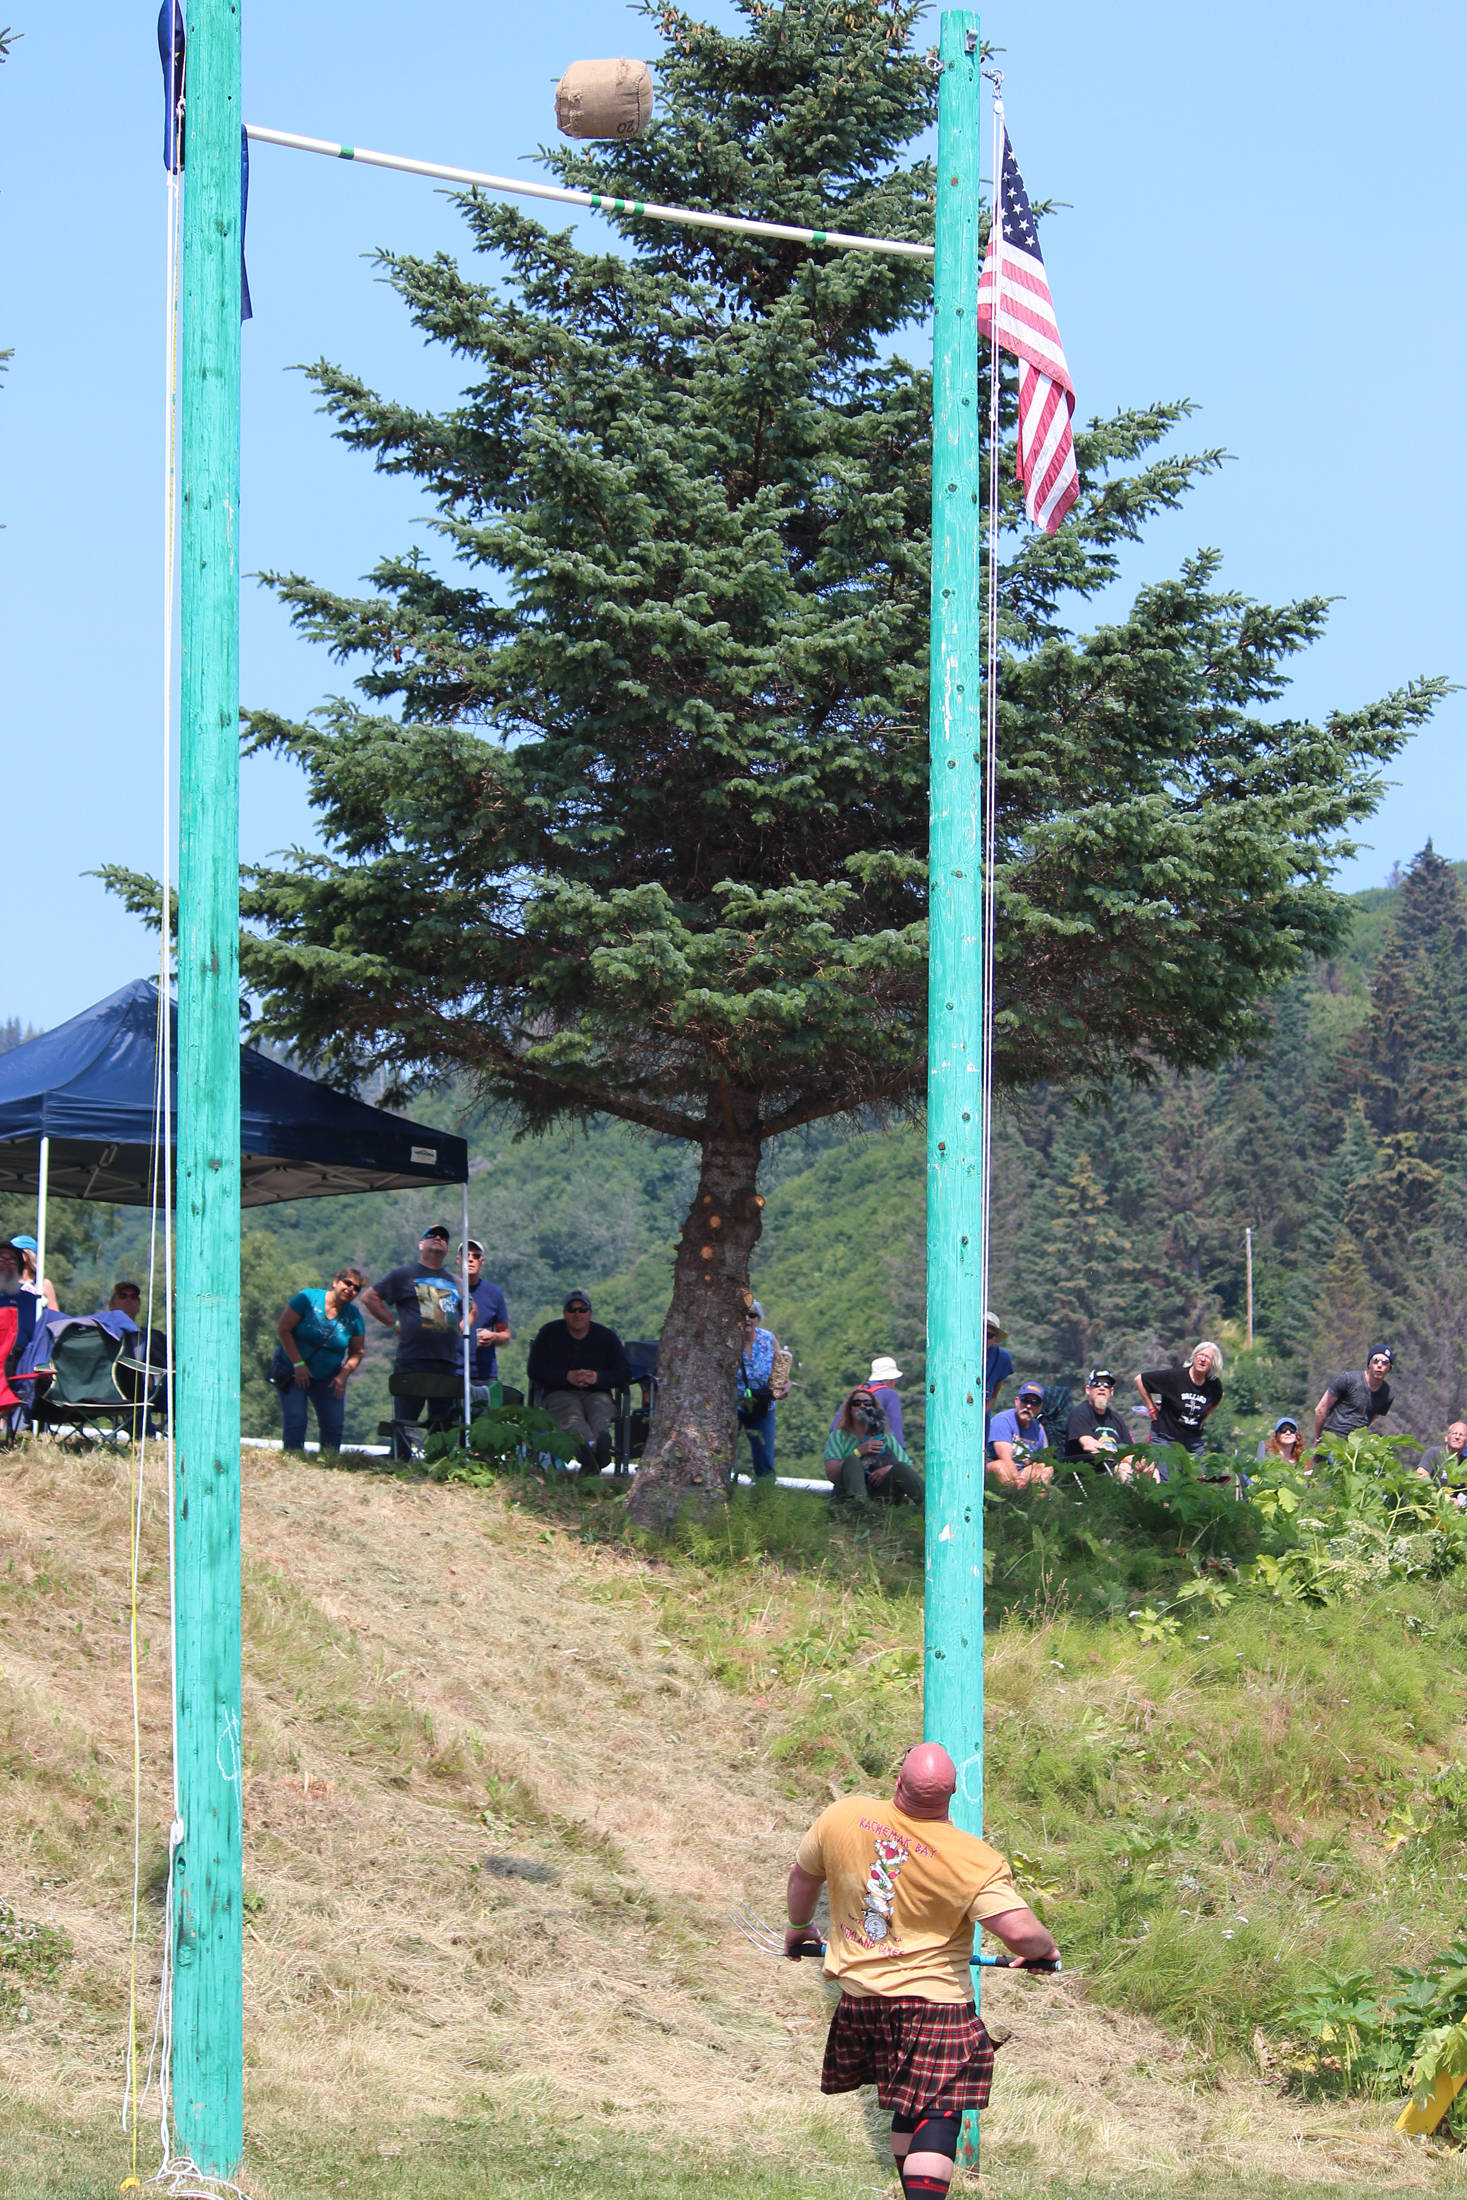 Robert Moody watches the sheaf he just threw with a pitchfork soar over the bar in the men’s sheaf throw competition at this year’s Kachemak Bay Highland Games on Saturday, July 6, 2019 at Karen Hornaday Park in Homer, Alaska. (Photo by Megan Pacer/Homer News)